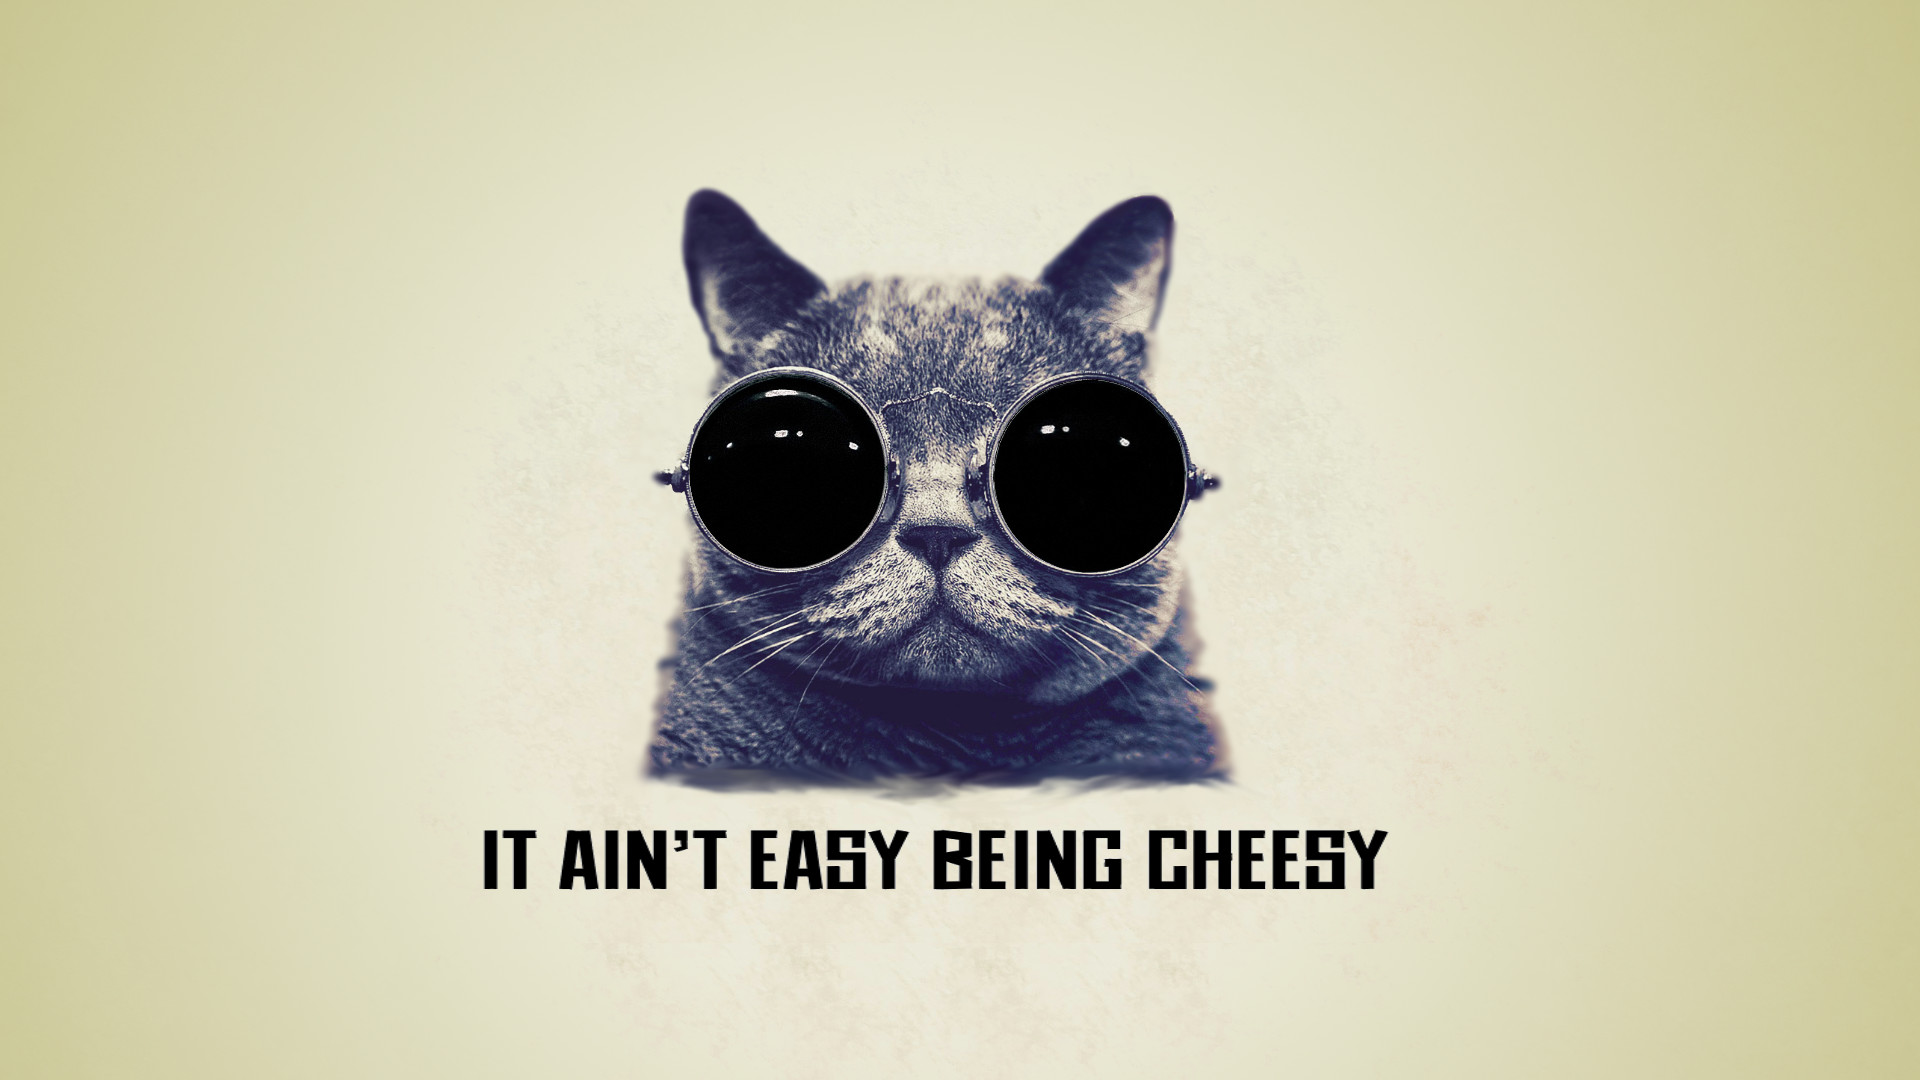 1920x1080 ... It ain't easy being cheesy cool cat wallpaper by saitoukazuma